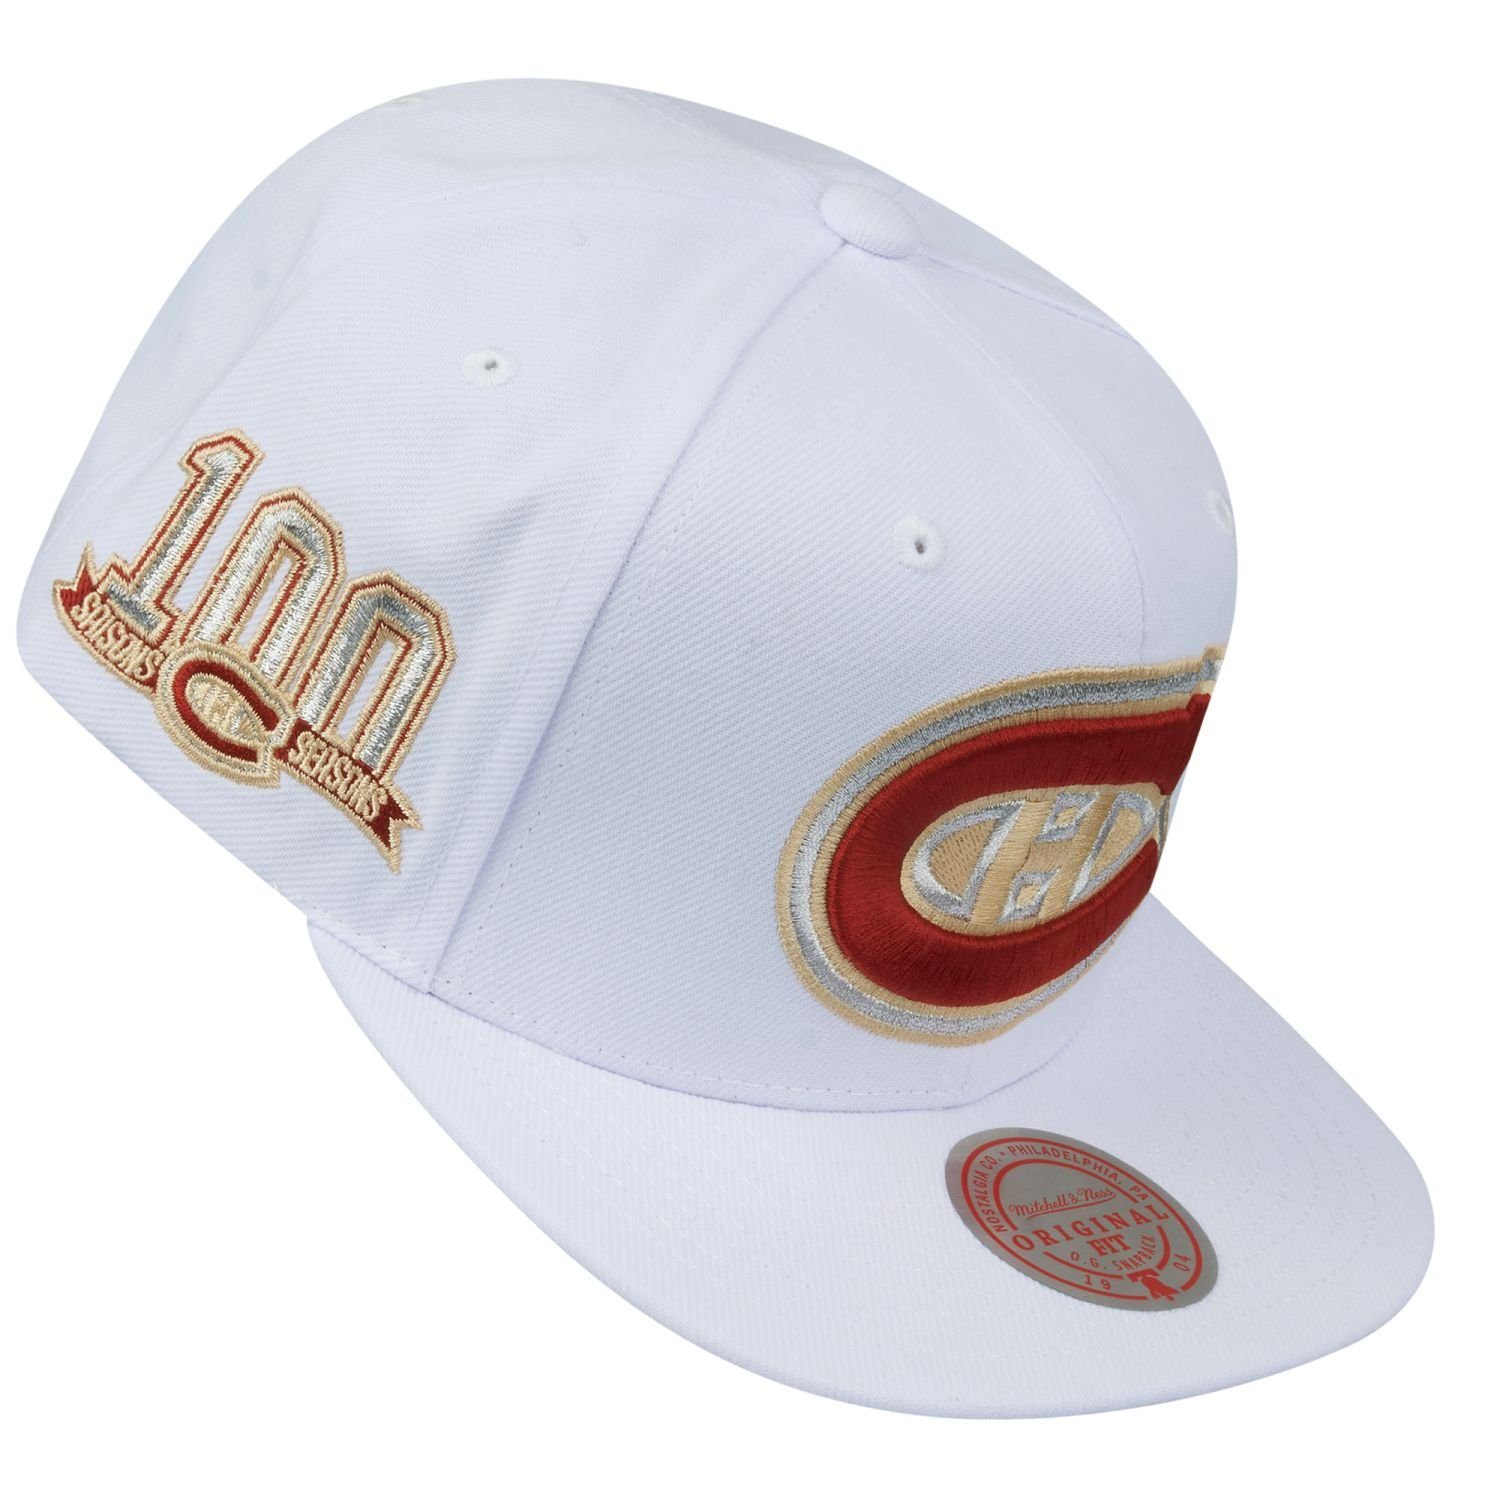 & Canadiens Ness Cap Mitchell Montreal Snapback WHITE